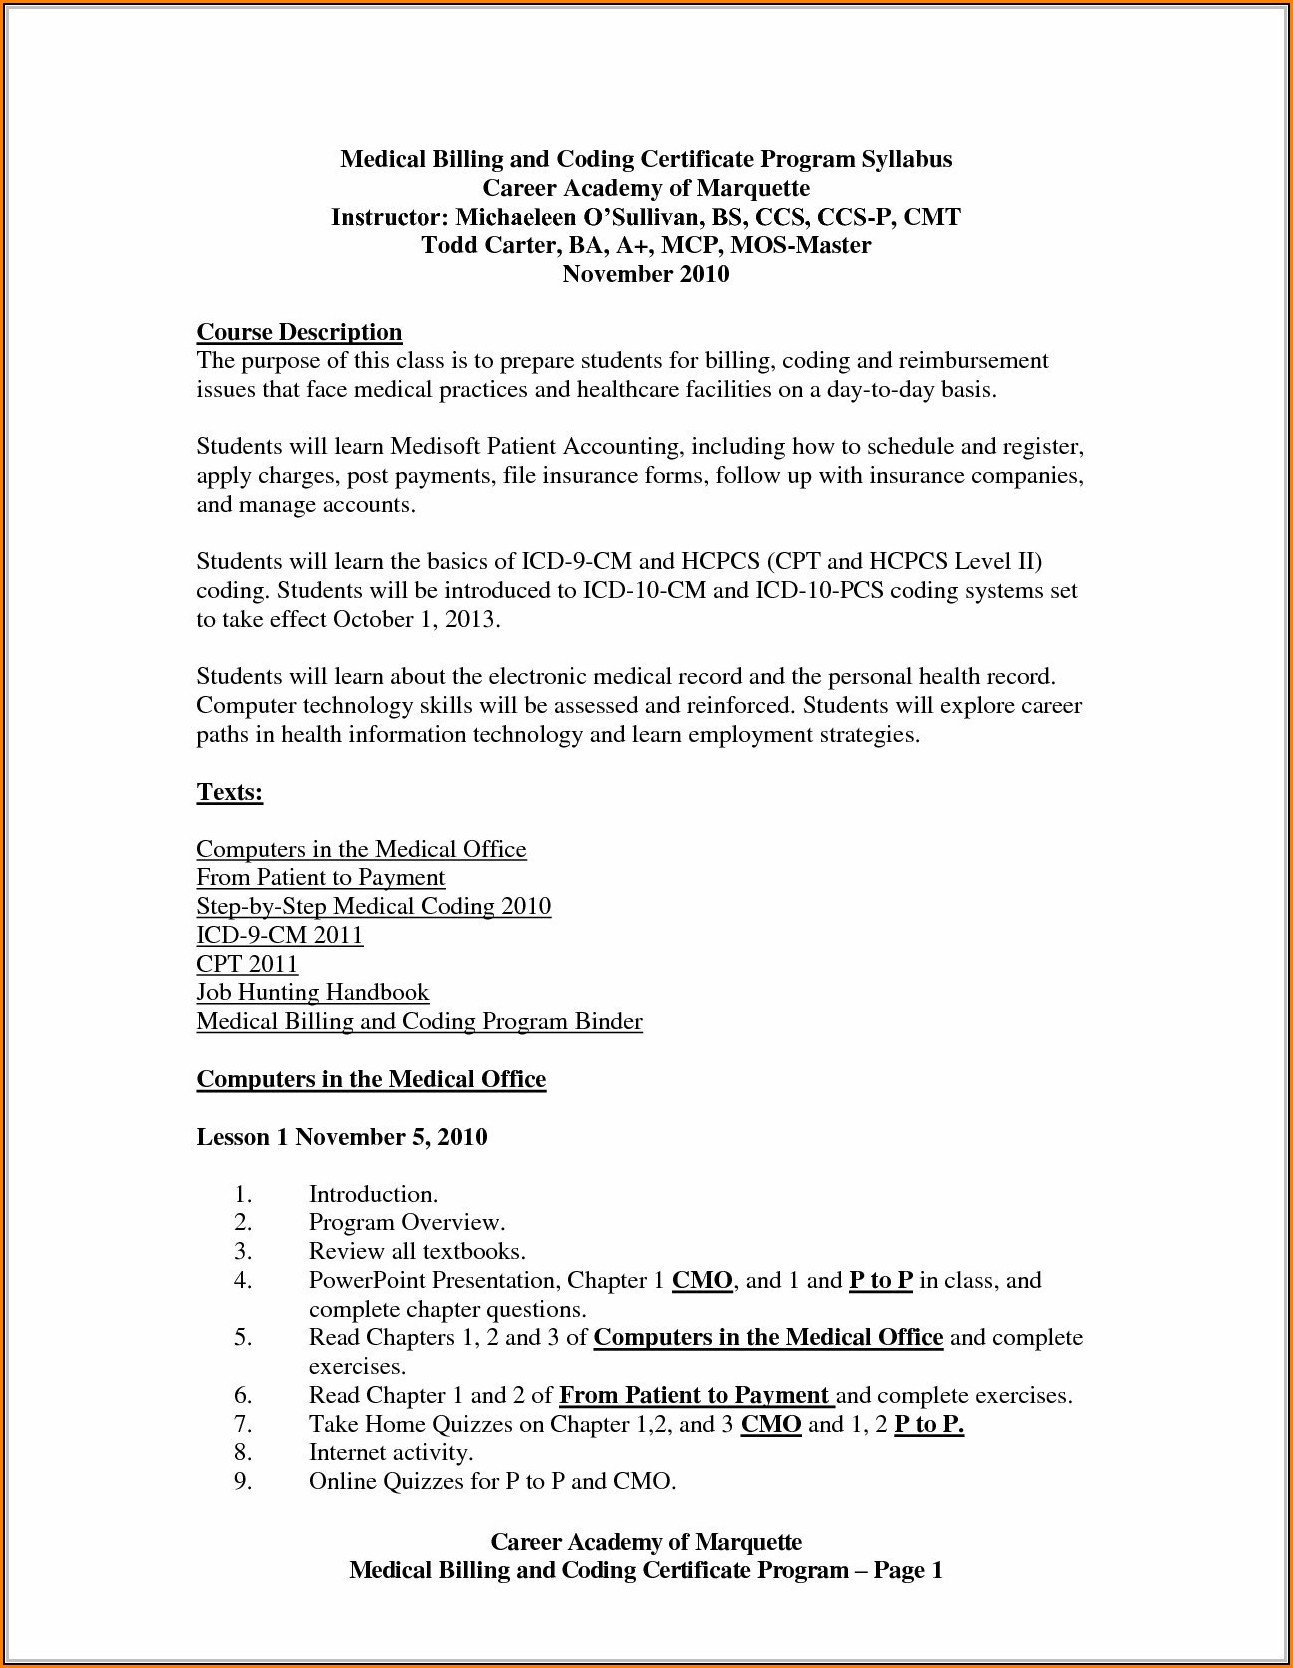 Cover Letter For Medical Billing And Coding